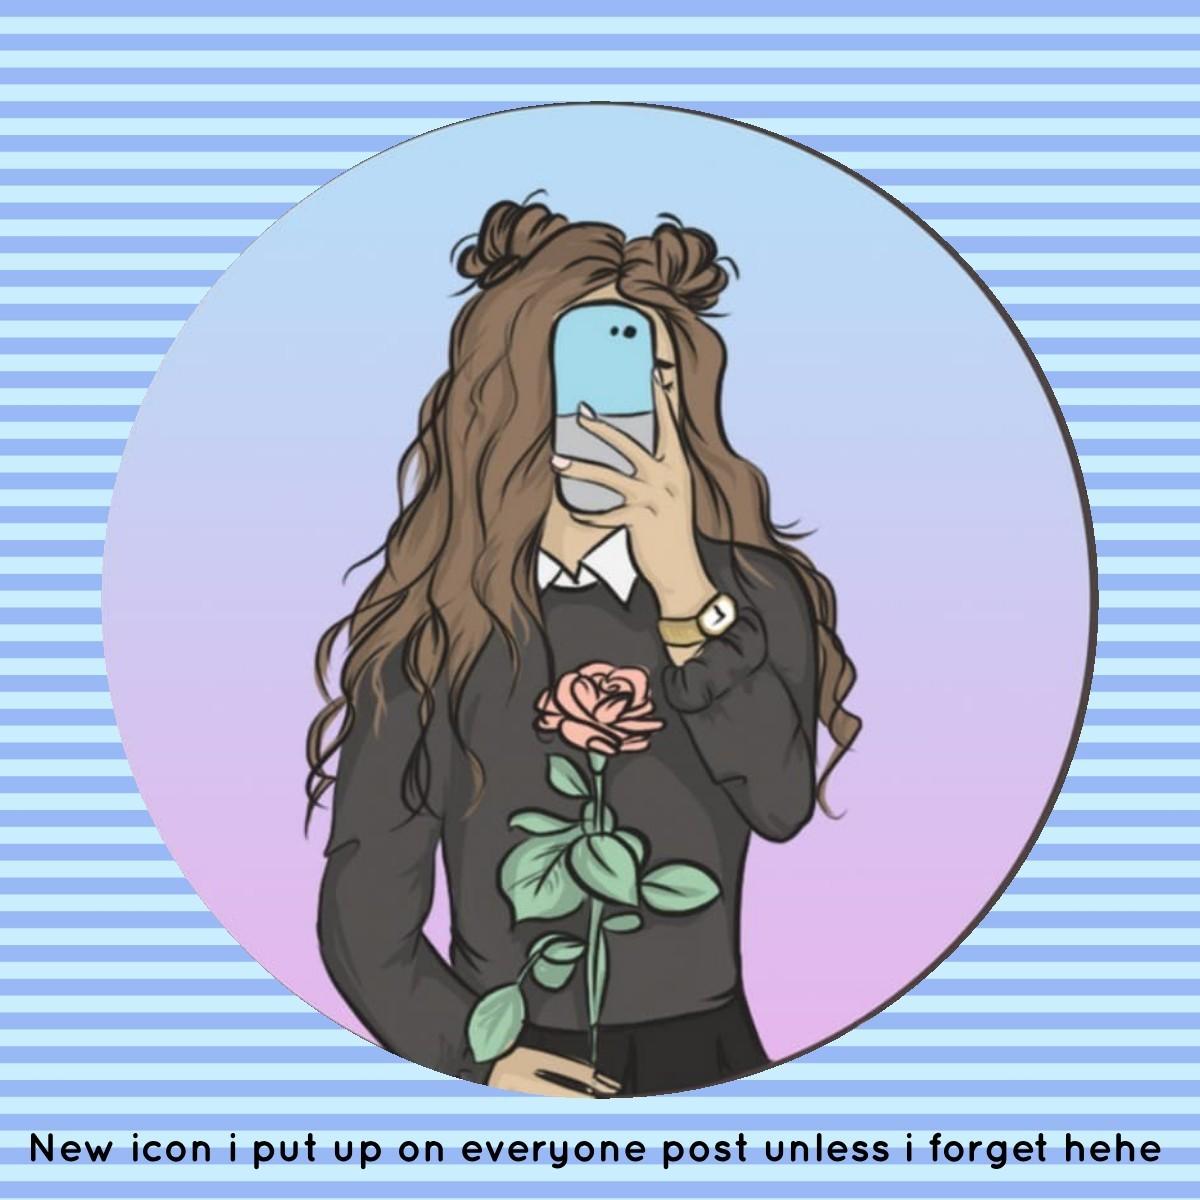 New icon i put up on everyone post unless i forget hehe